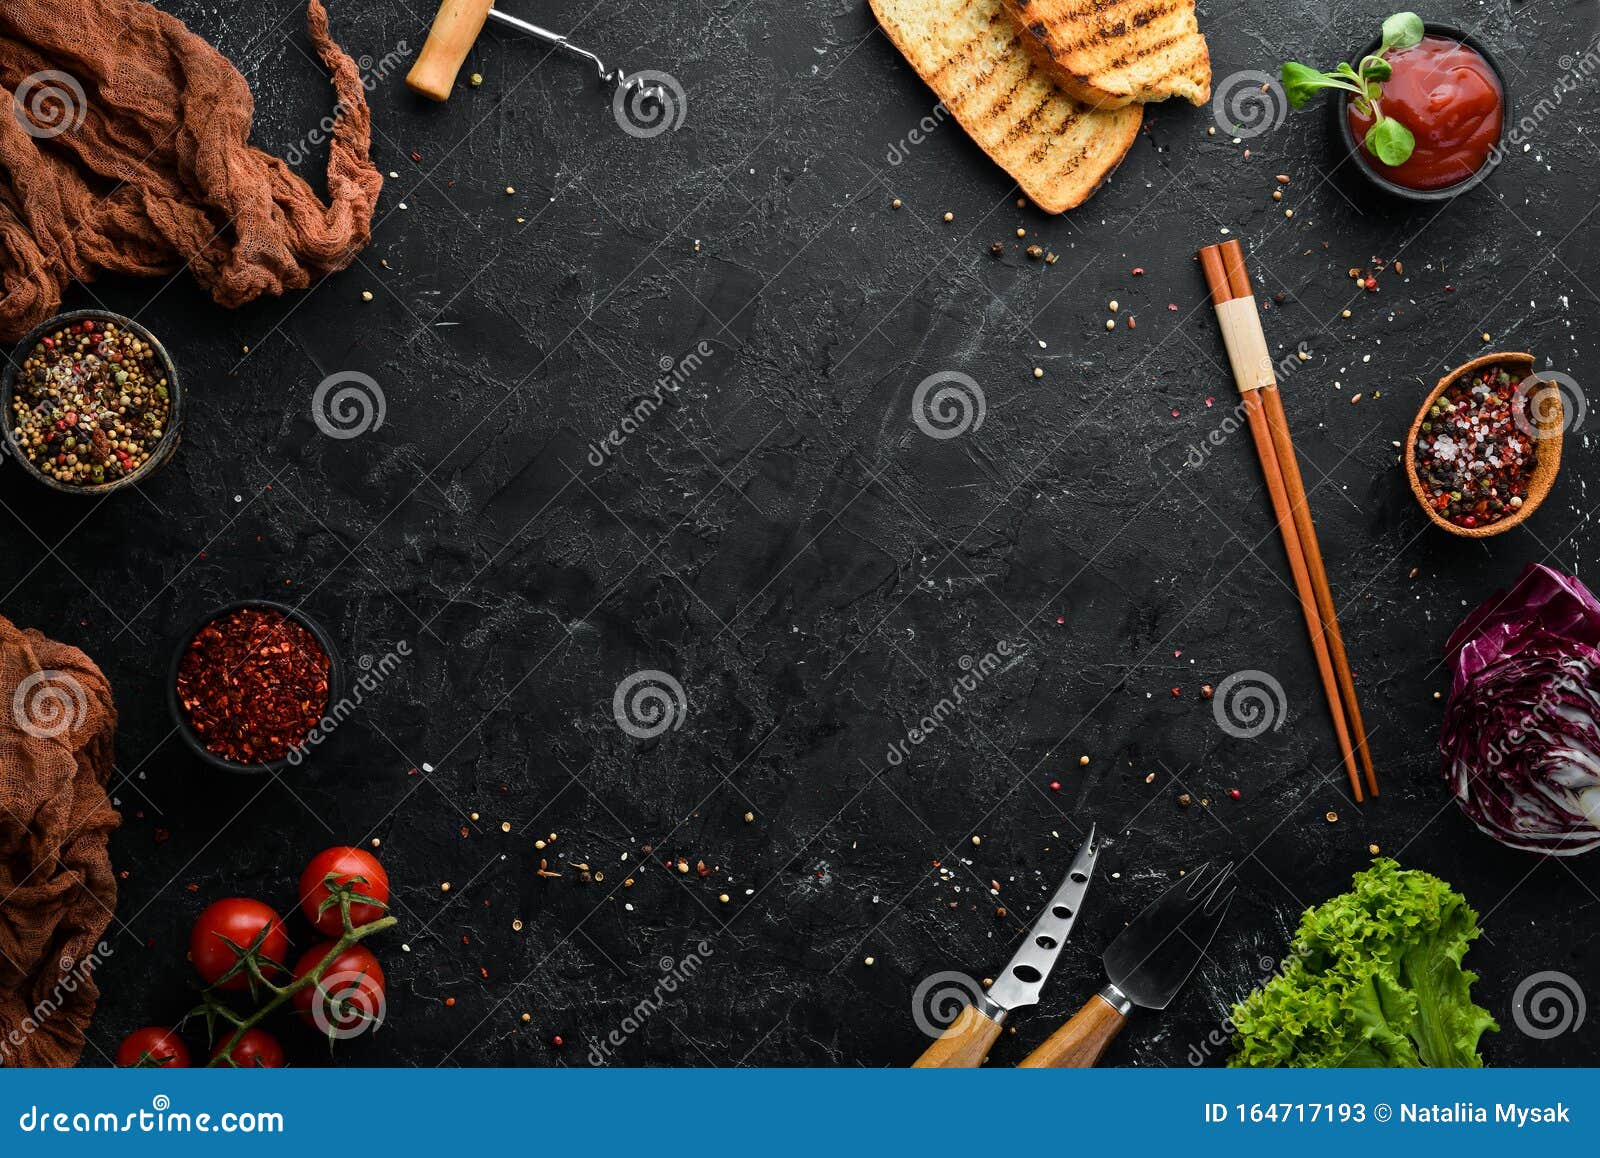 Cooking Banner. Kitchen Black Table and Ingredients. Food. Top View ...